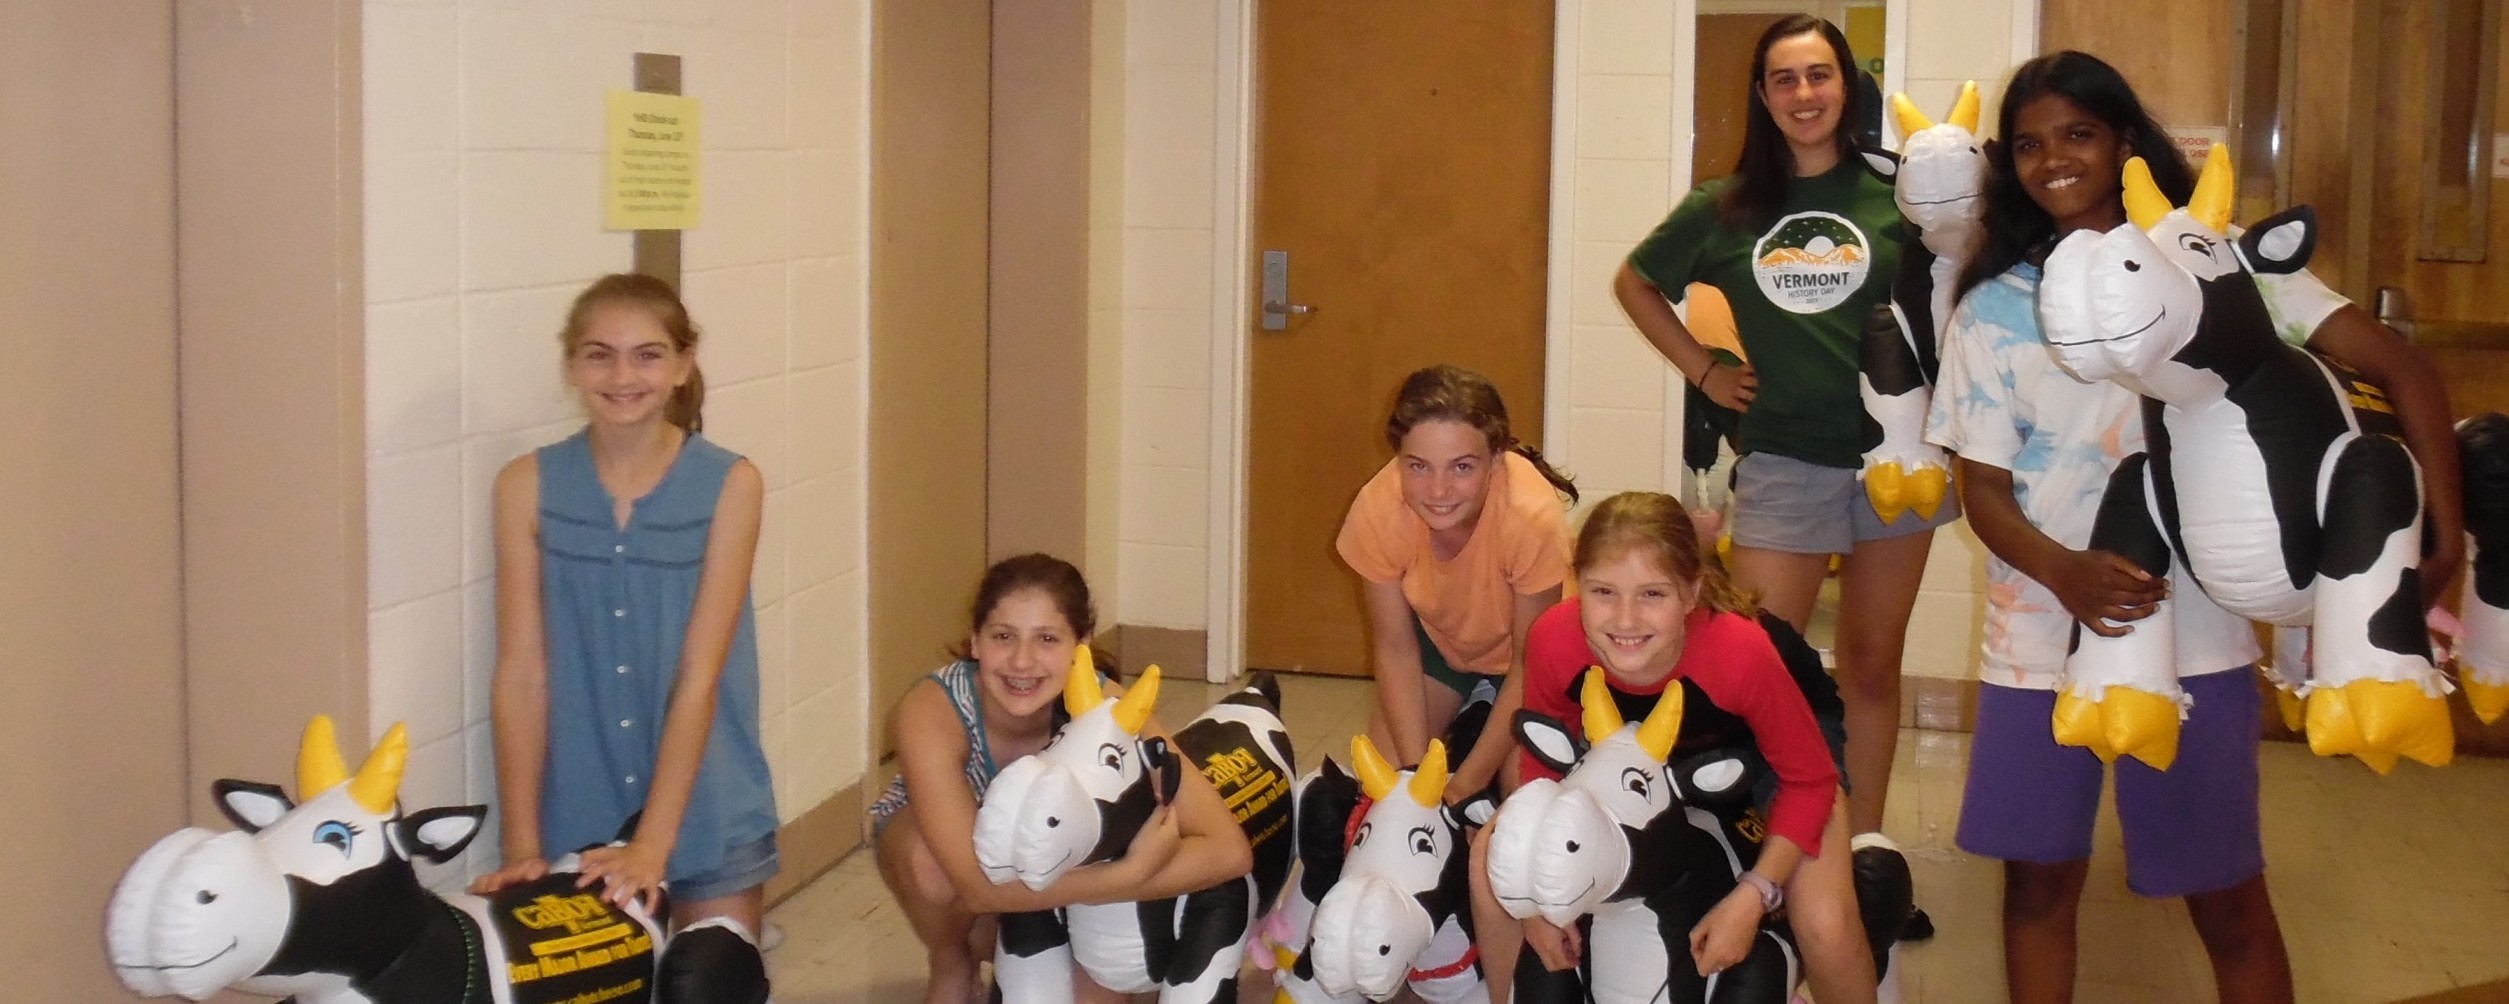 group of students in the dorm with inflatable cows at National History Day 2017